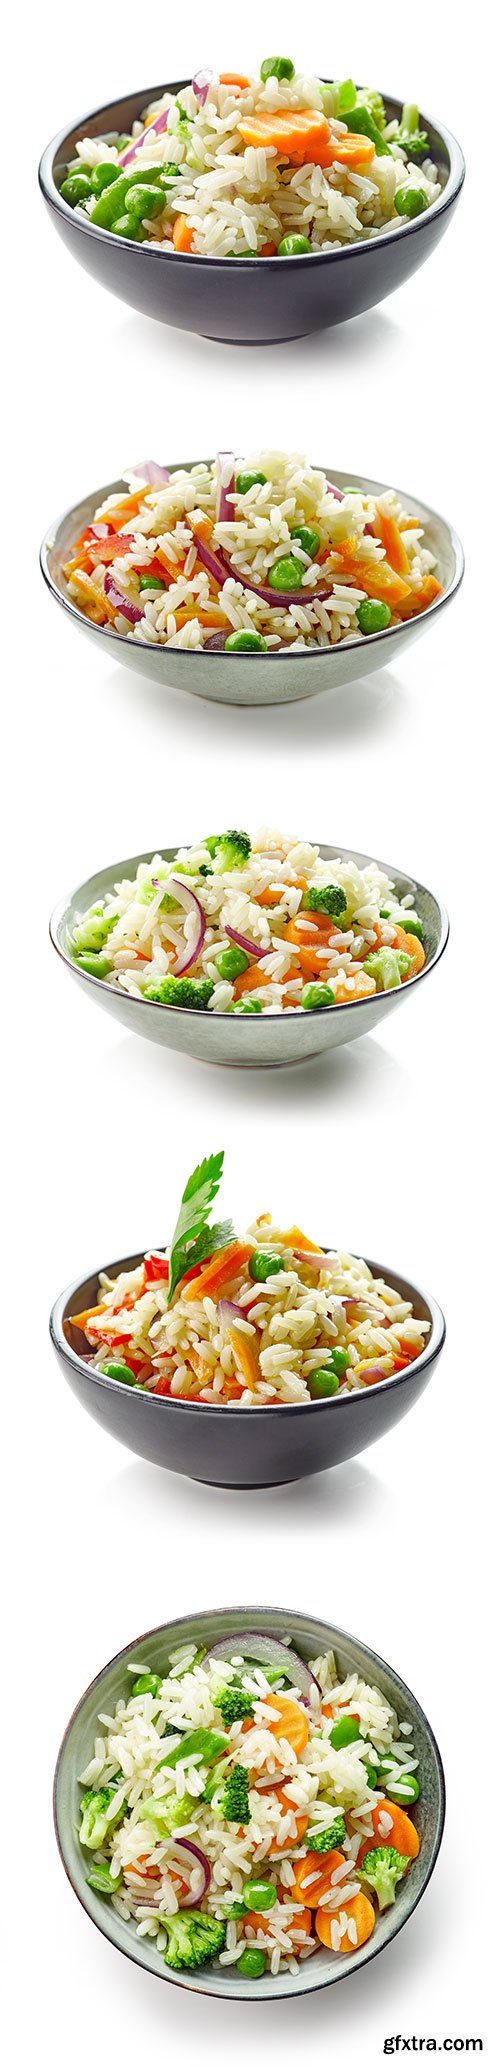 Photo - Bowl Of Rice And Vegetables Isolated - 7xJPGs